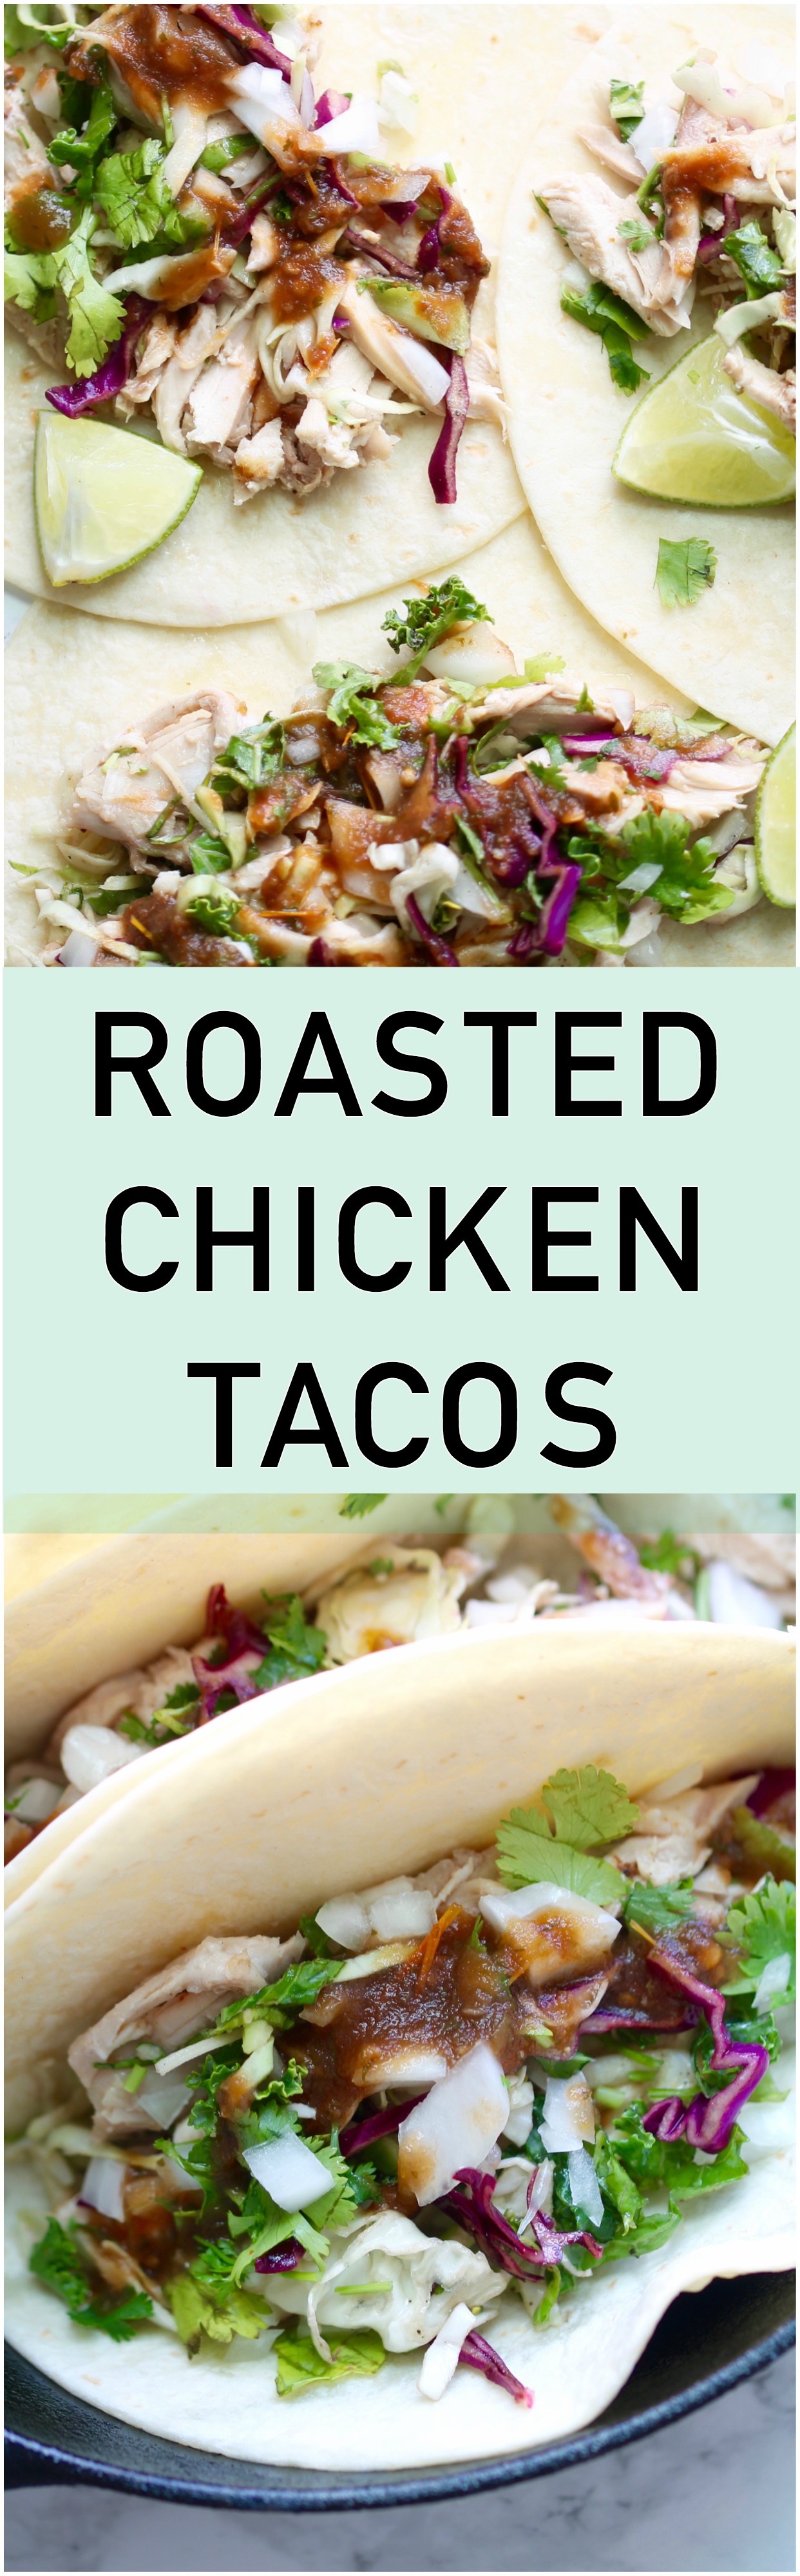 Roasted Chicken Tacos are dinner friendly for the whole family. Everything can be prepped ahead of time or bought directly from the store for convenience. 